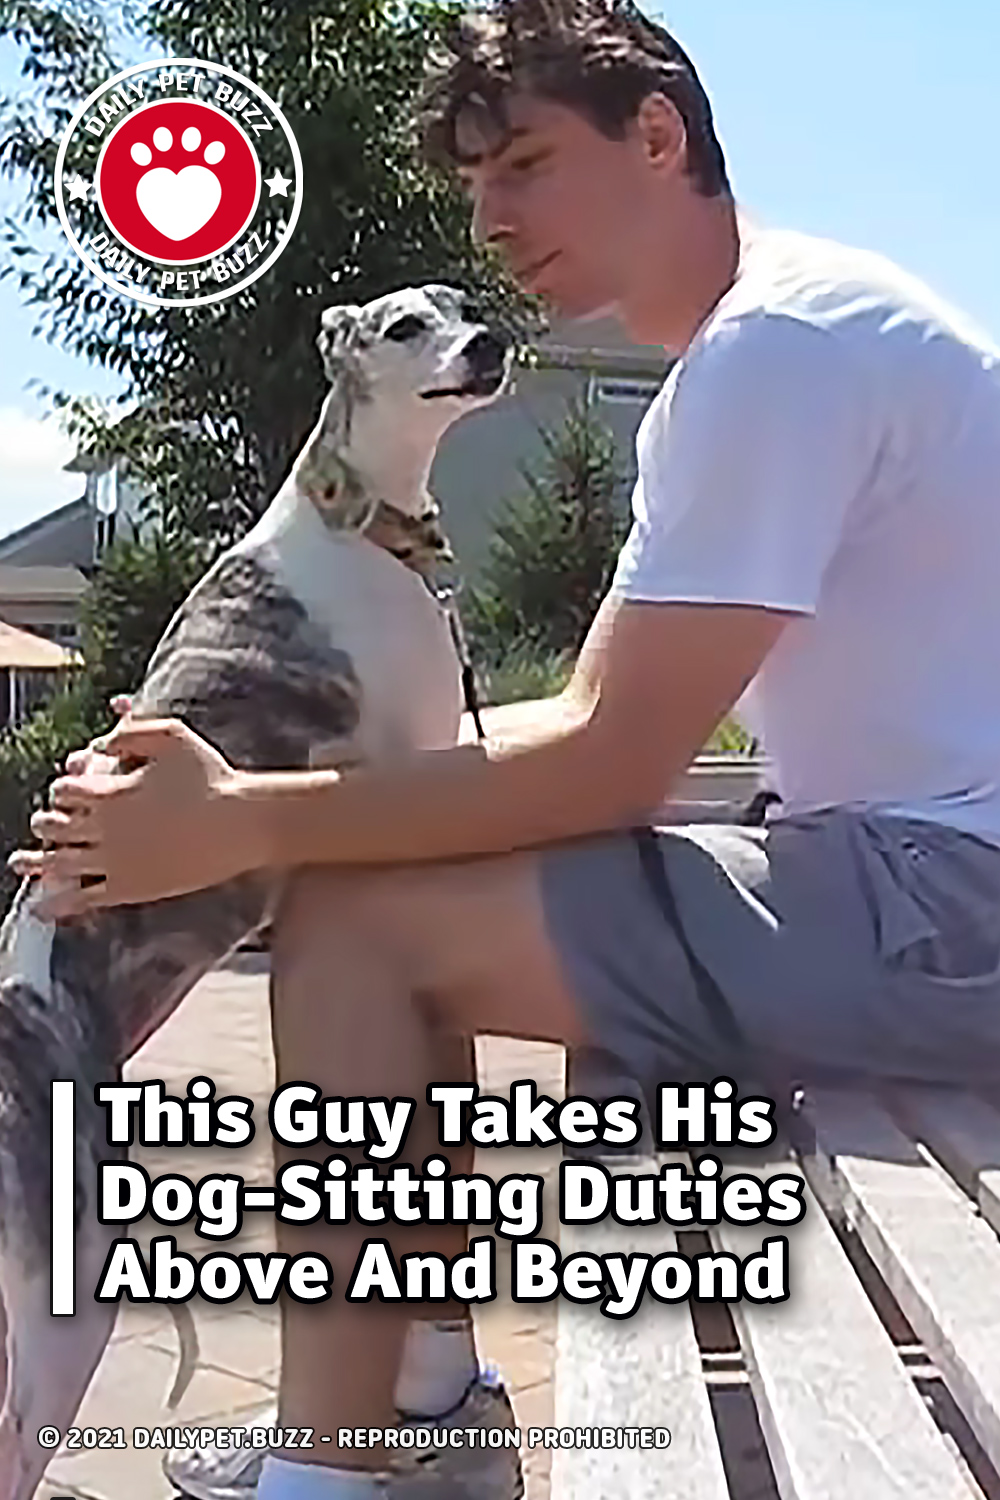 This Guy Takes His Dog-Sitting Duties Above And Beyond